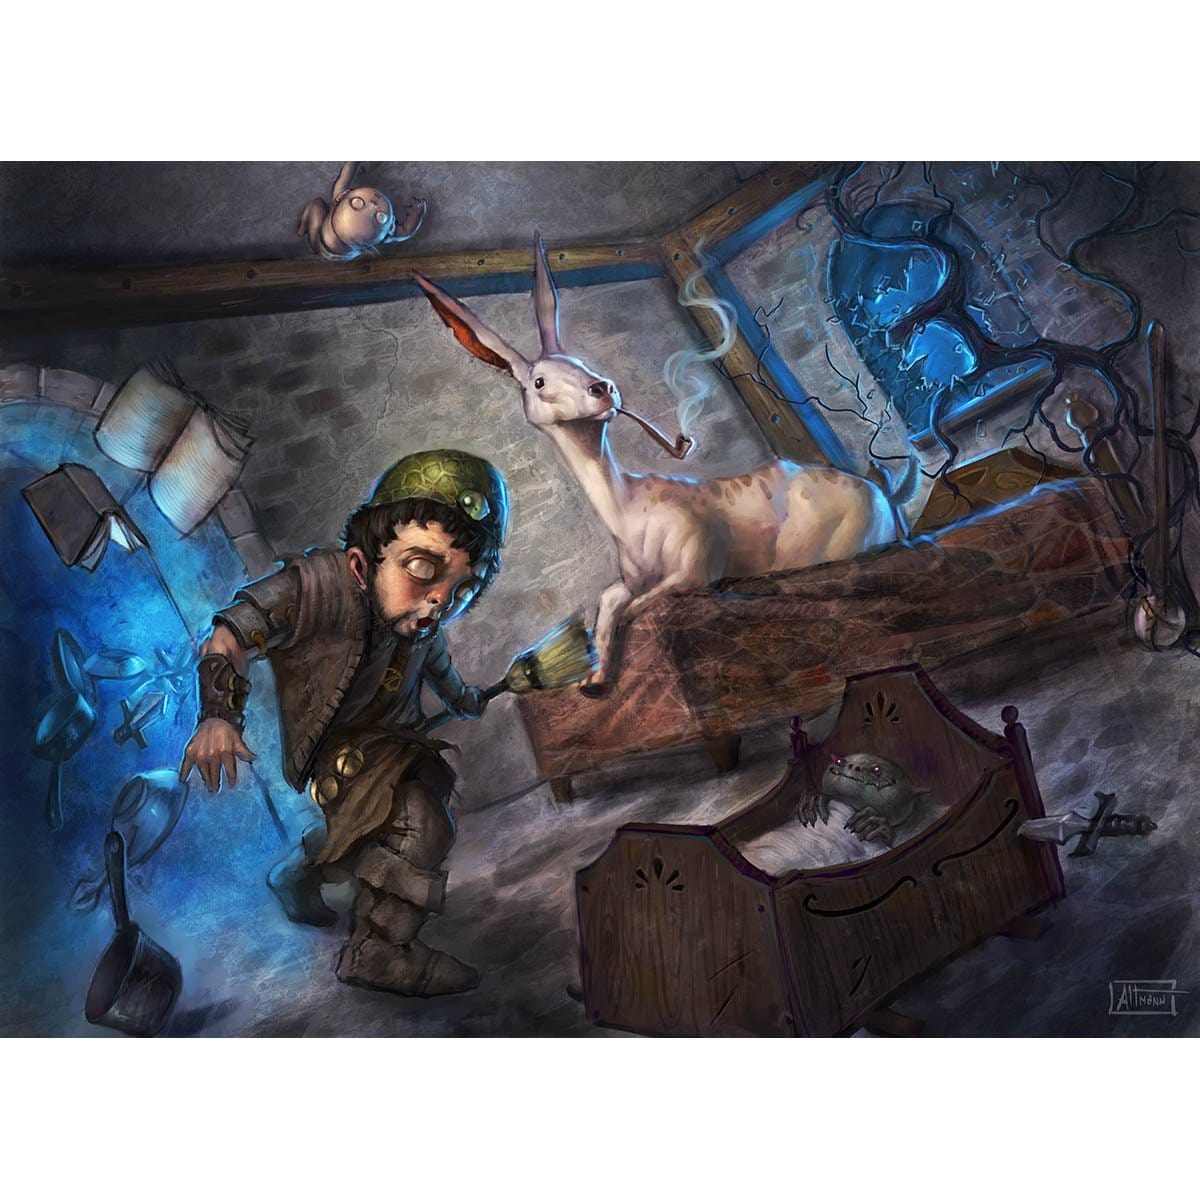 Couch’s Mischief Print - Print - Original Magic Art - Accessories for Magic the Gathering and other card games